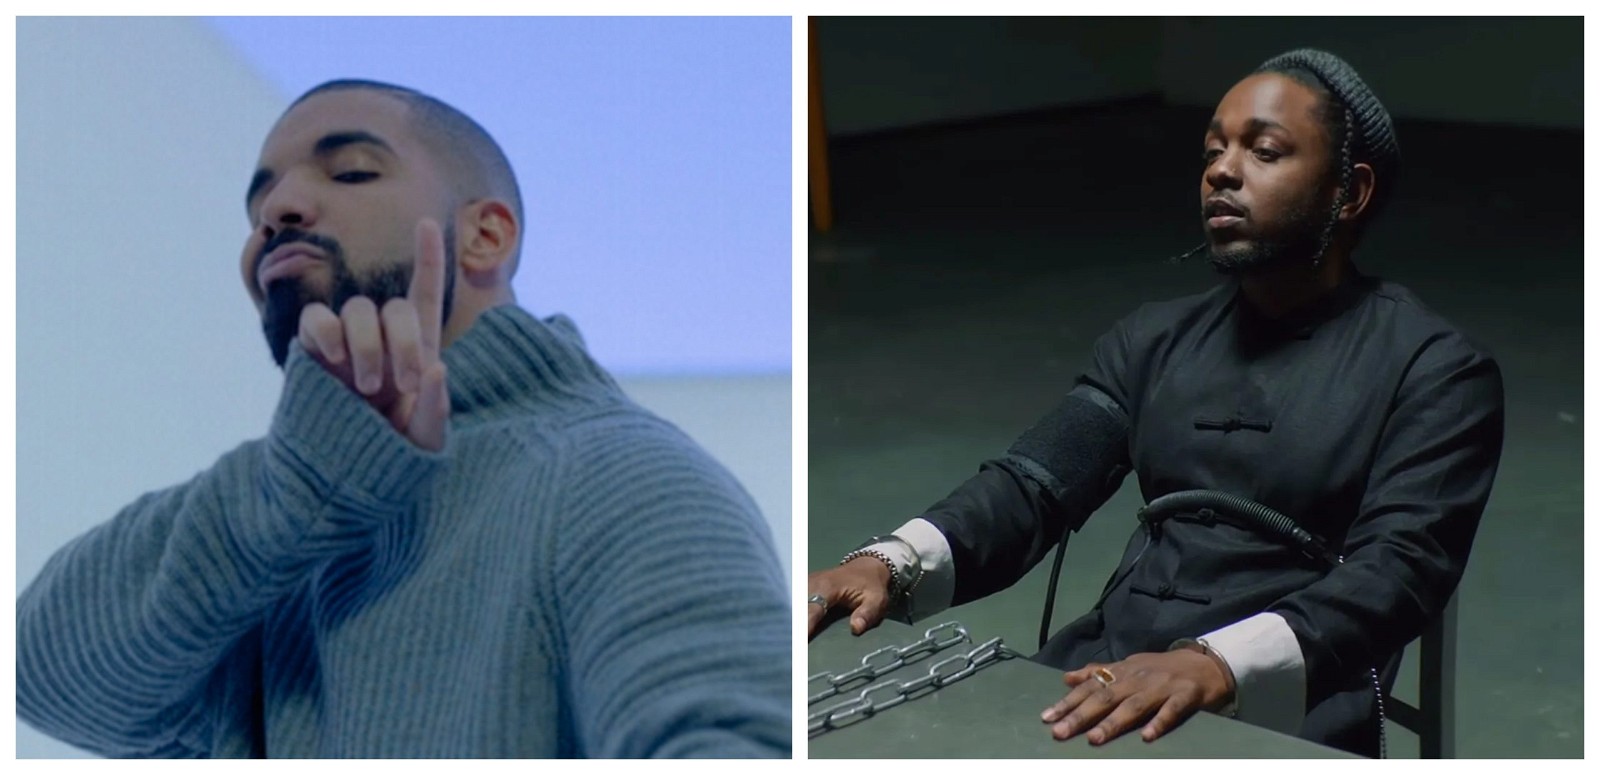 Drake in a still from One Dance and Kendrick Lamar in a still from DNA.